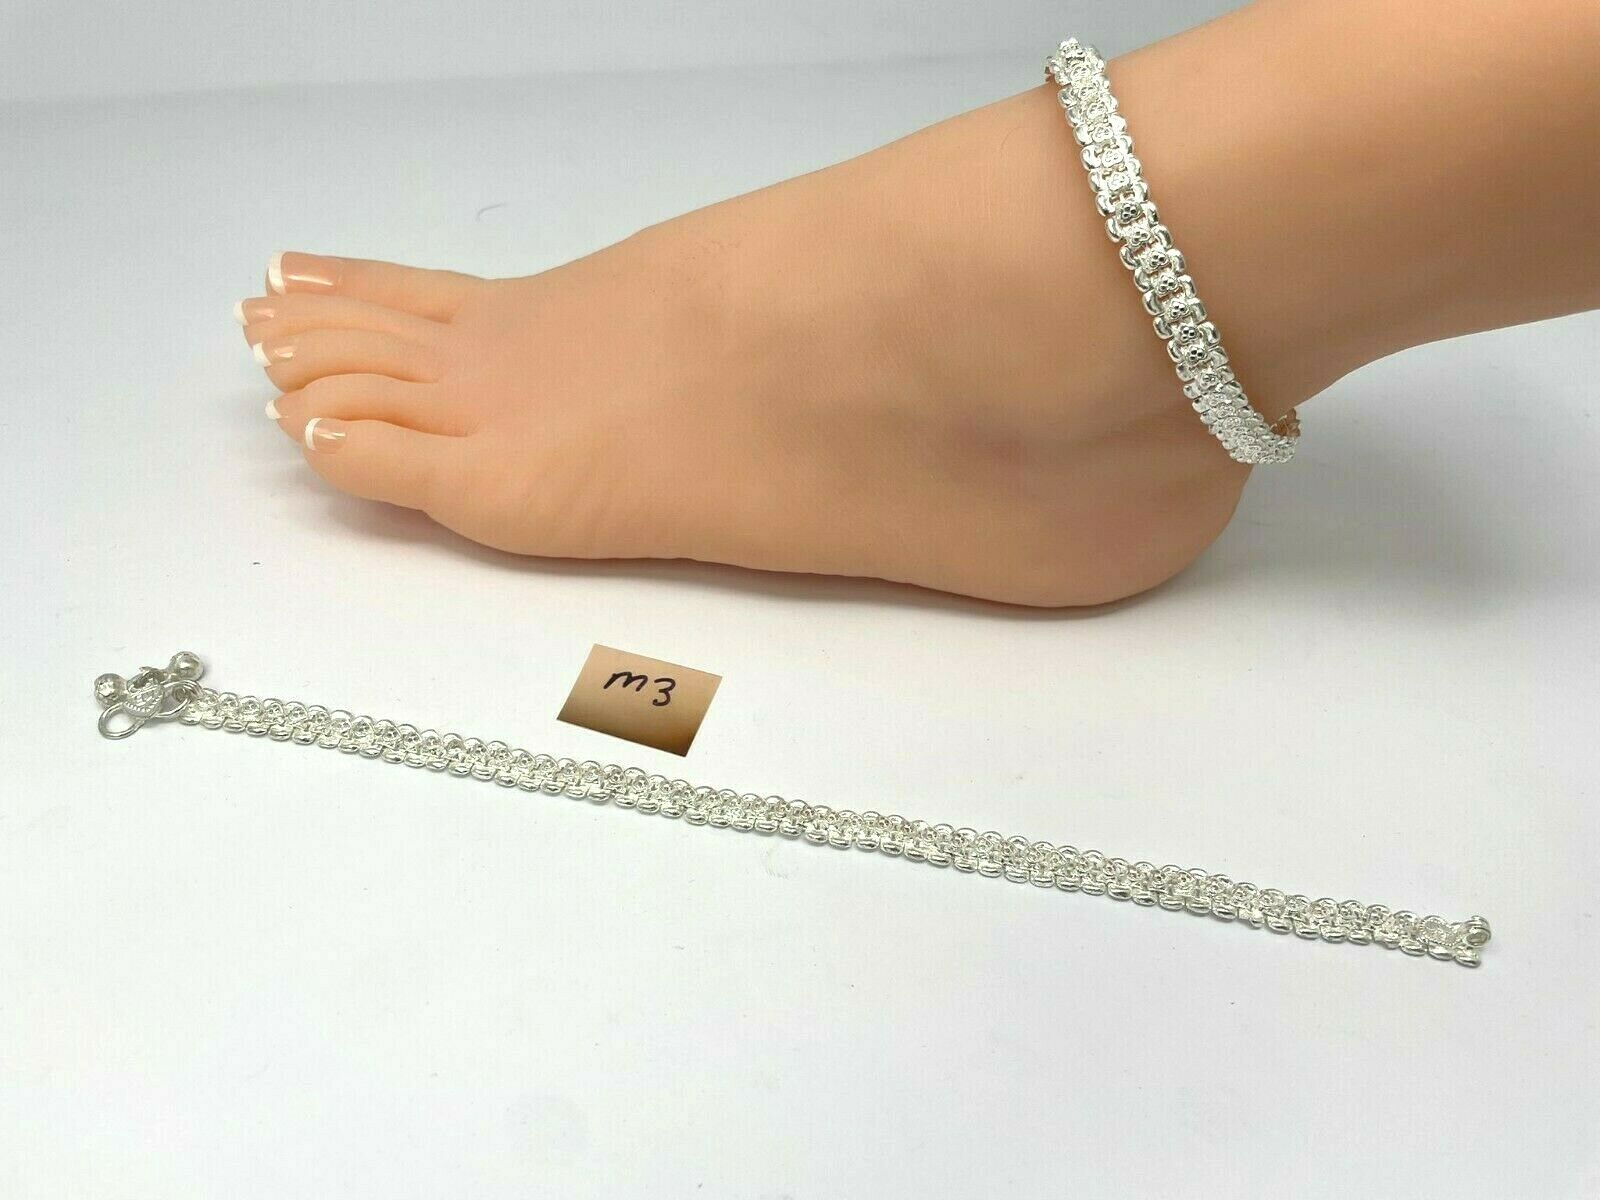 M3 Anklets Payal Pair for Legs Indian Jewelry